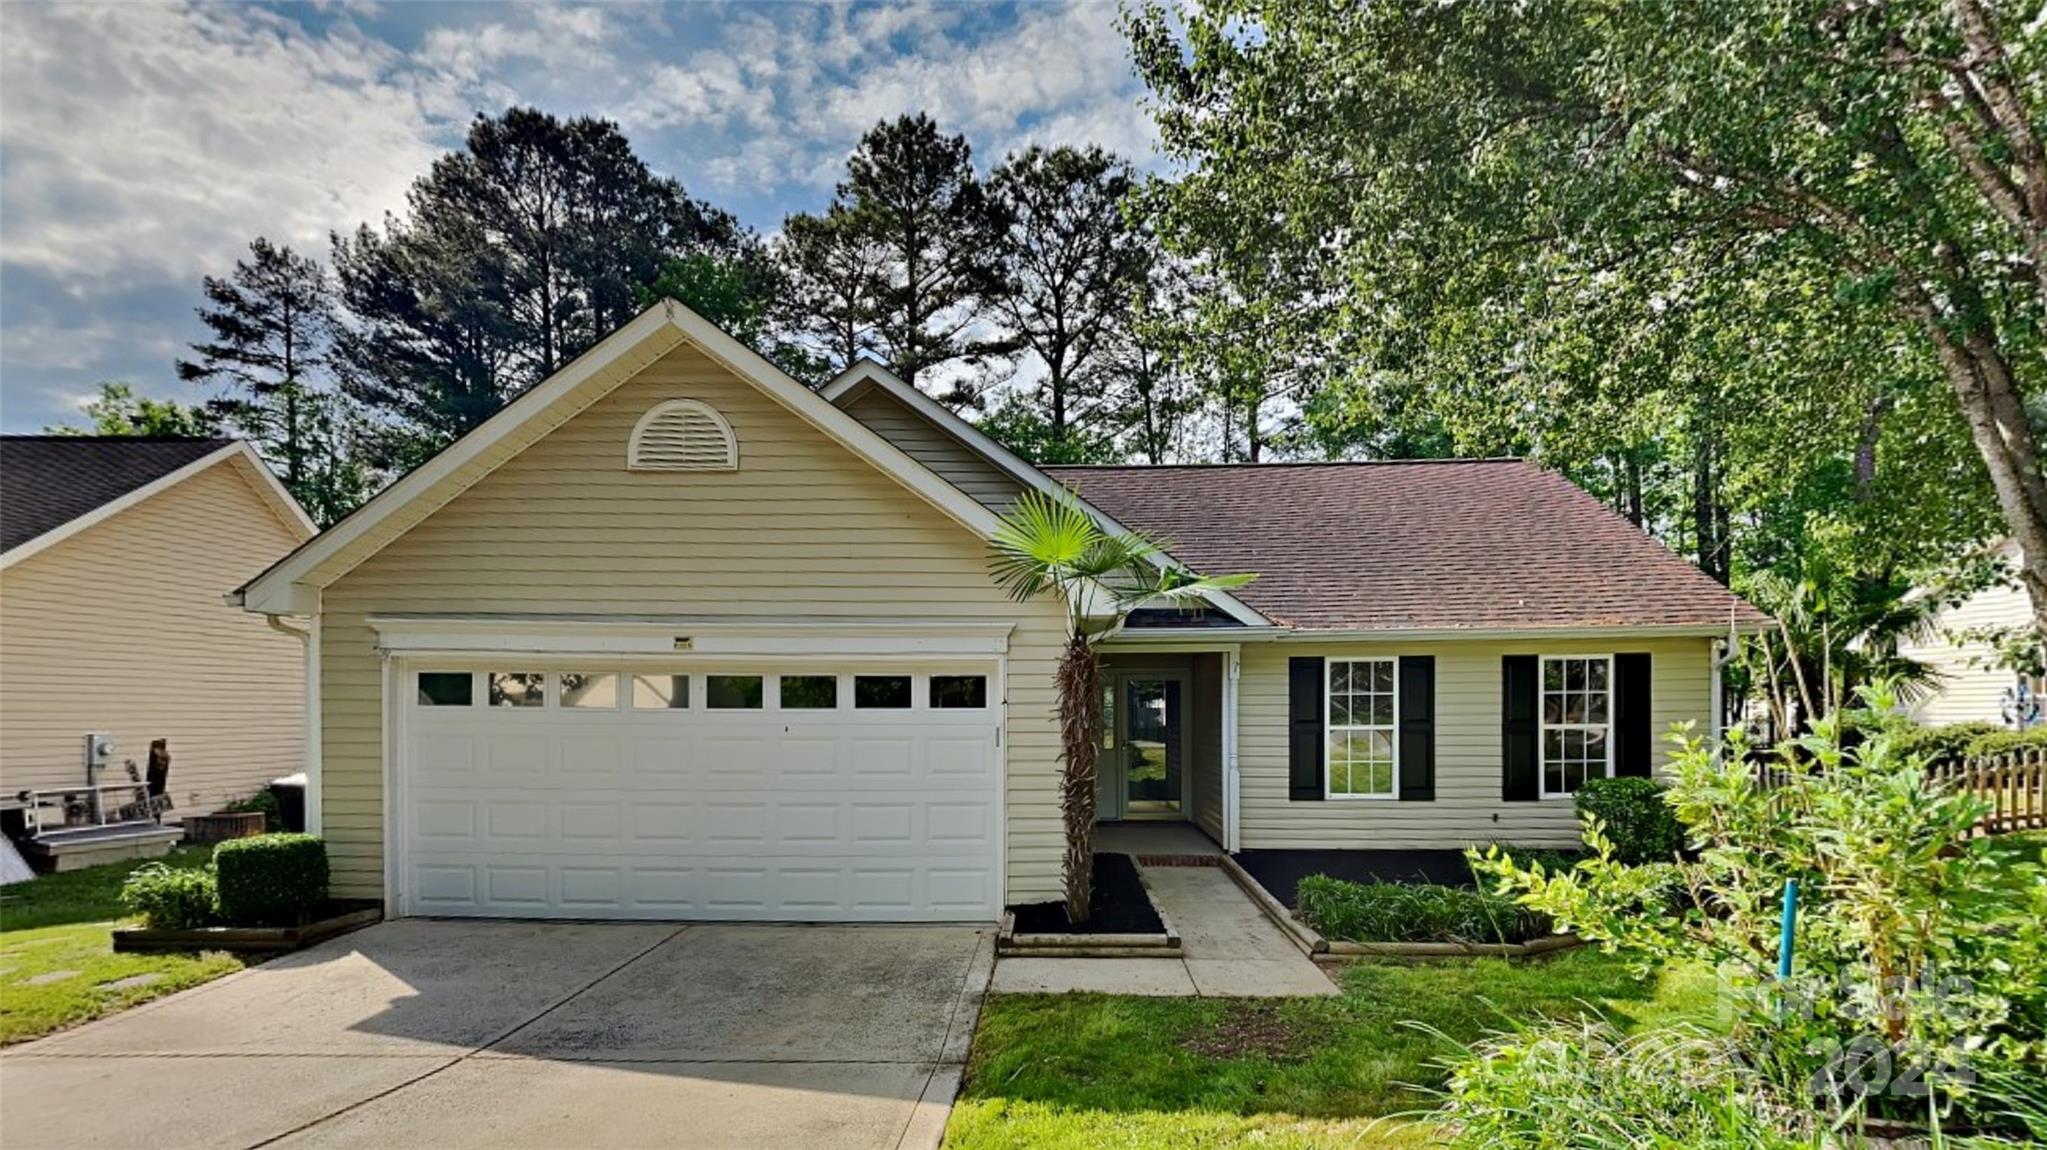 Photo one of 627 Montgomery Dr Rock Hill SC 29732 | MLS 4132603